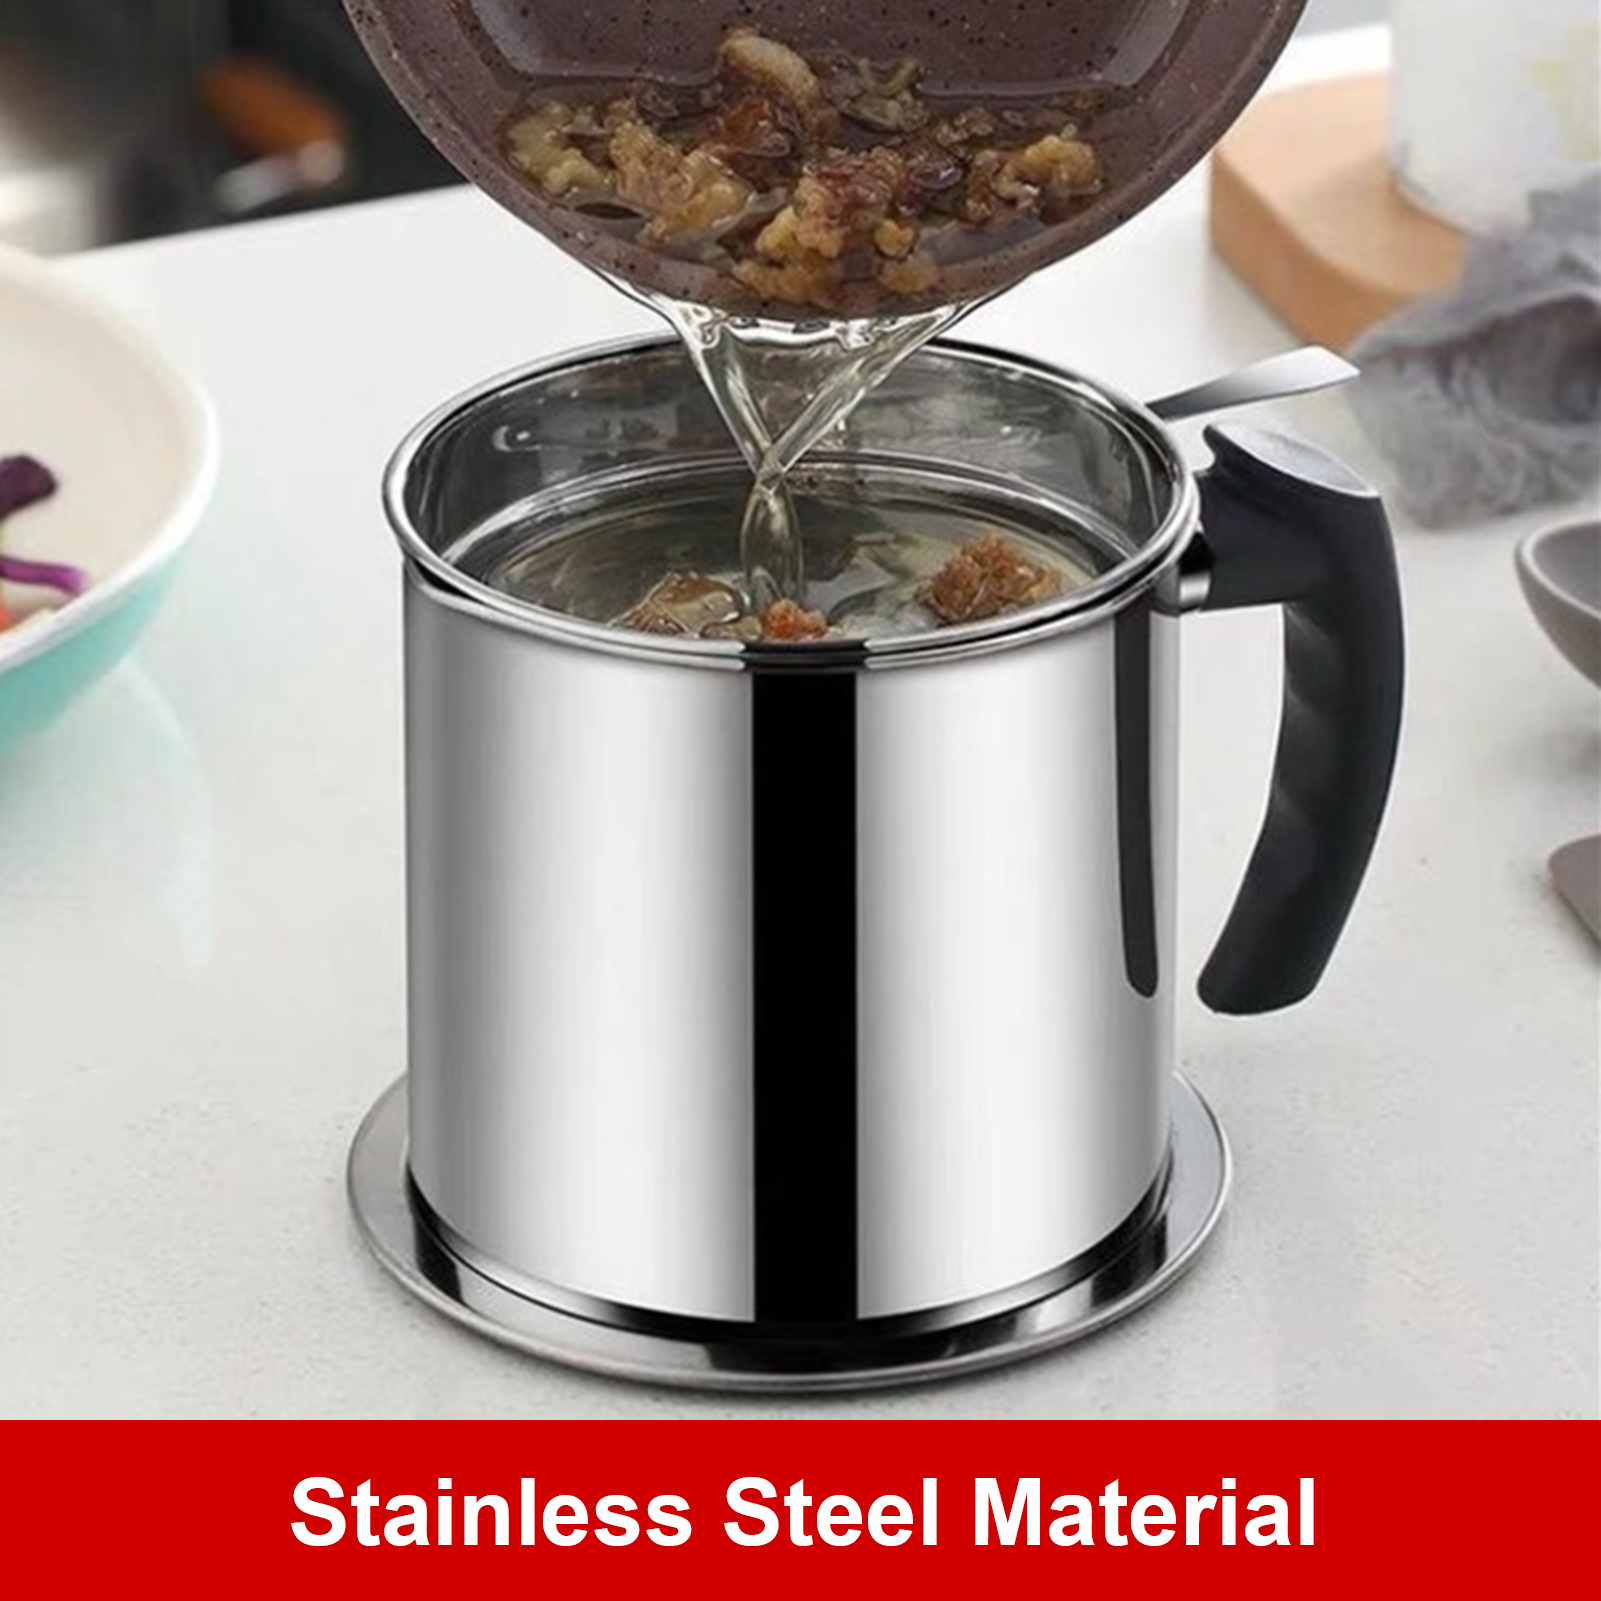 Tomshoo Kitchen Oil Pot Stainless Steel Oil Filter Household Cooking Oil Fat Separator With Lid - image 3 of 7